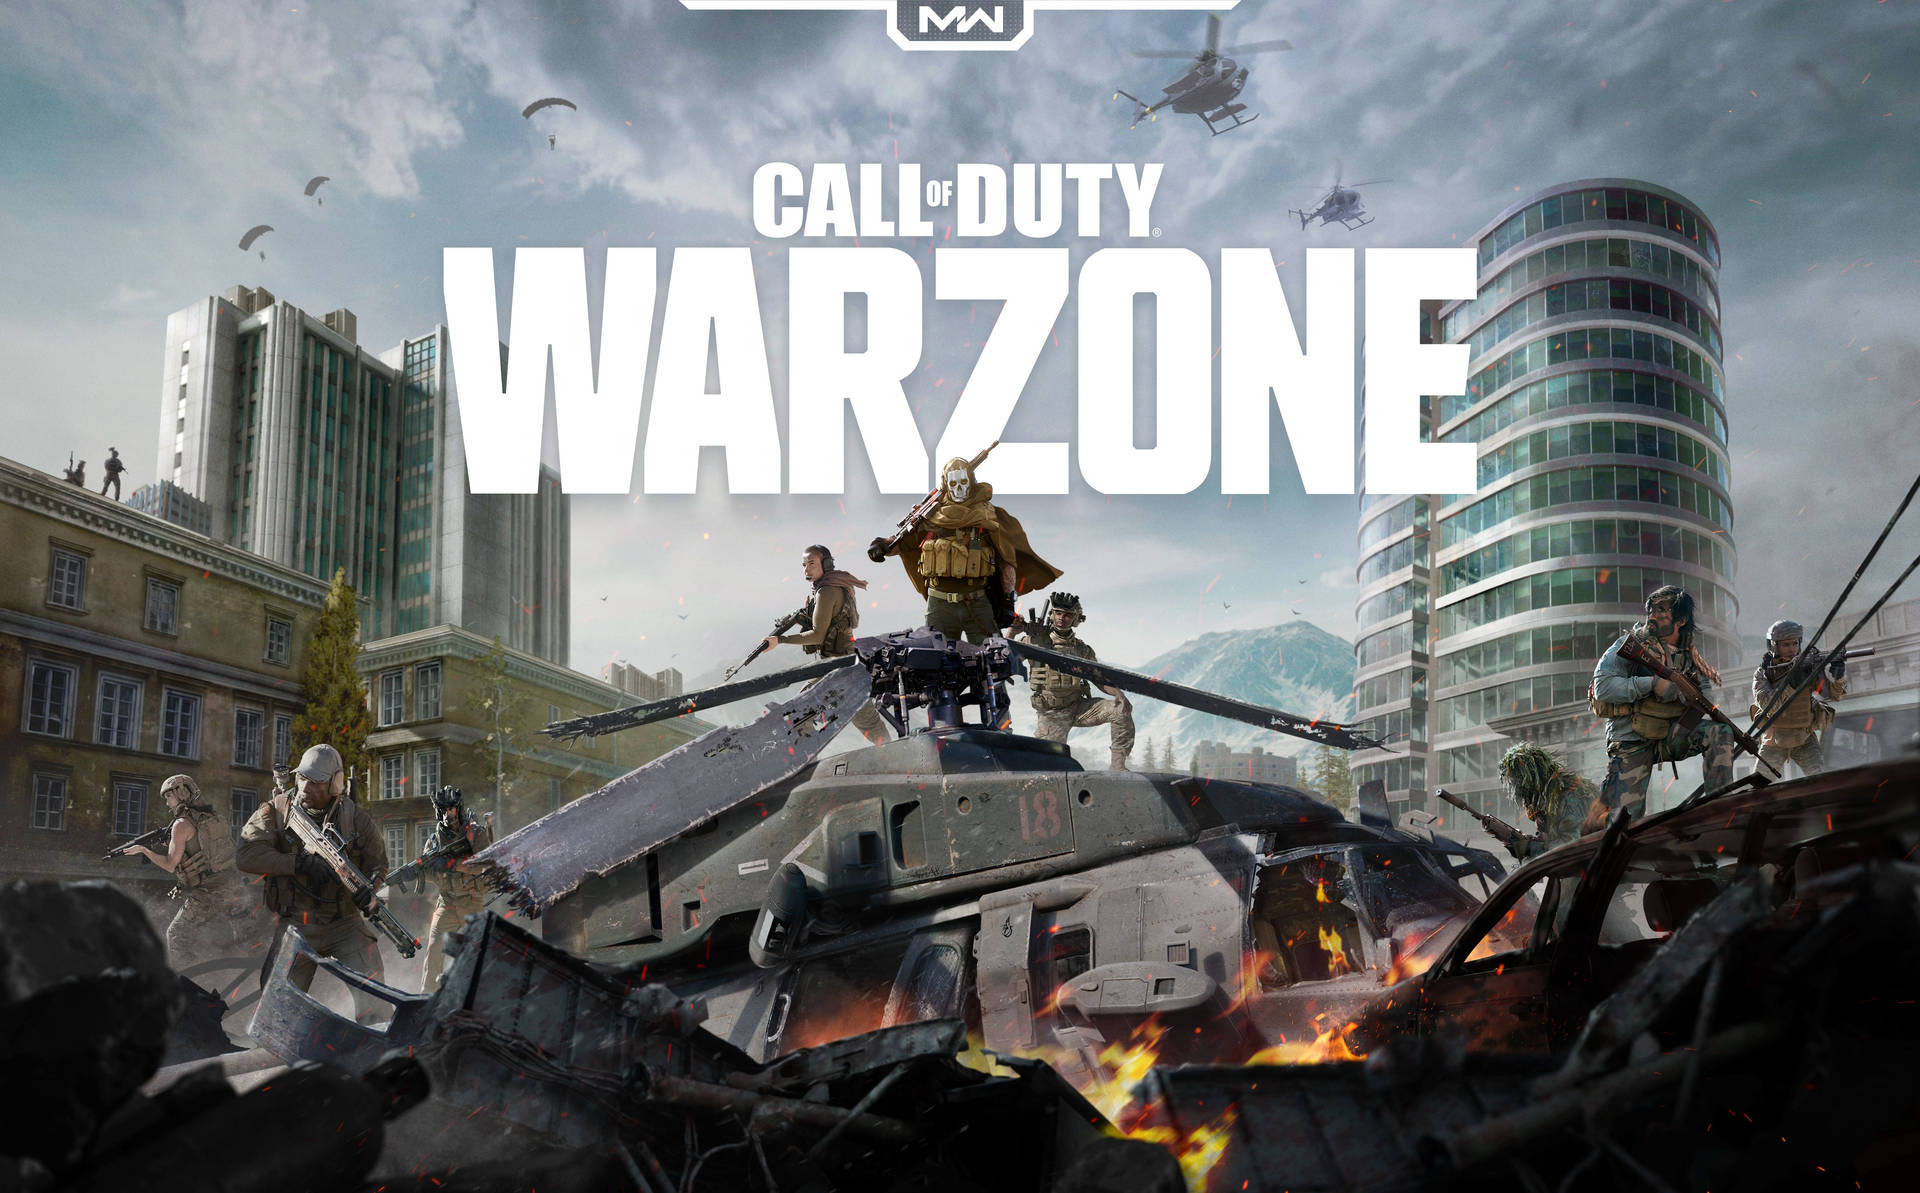 Call Of Duty Warzone 4k Crashed Helicopter Background